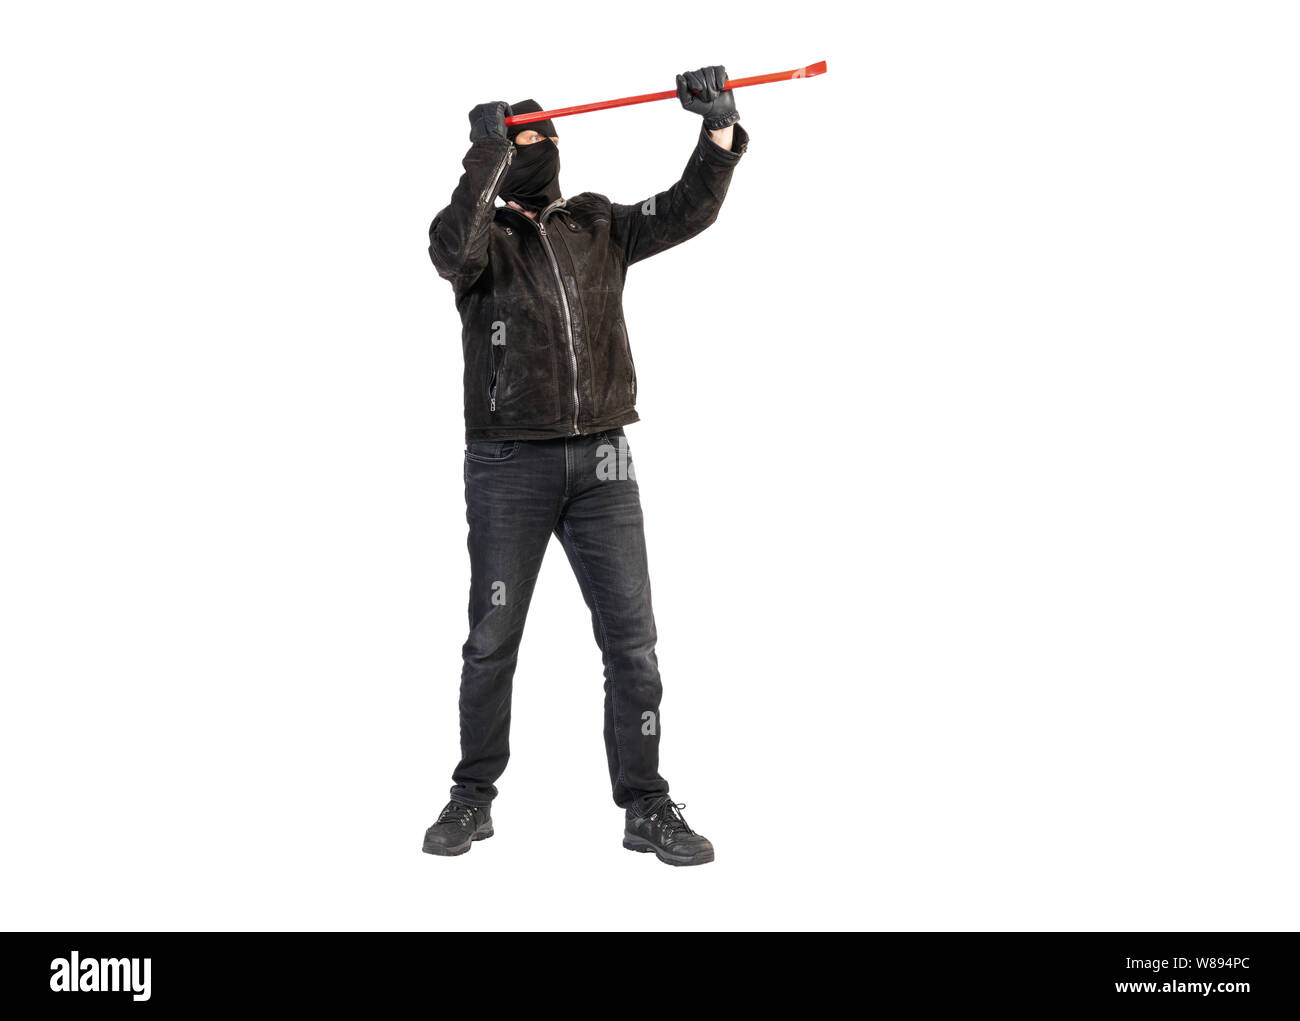 burglar with crowbar and mask against a white background Stock Photo